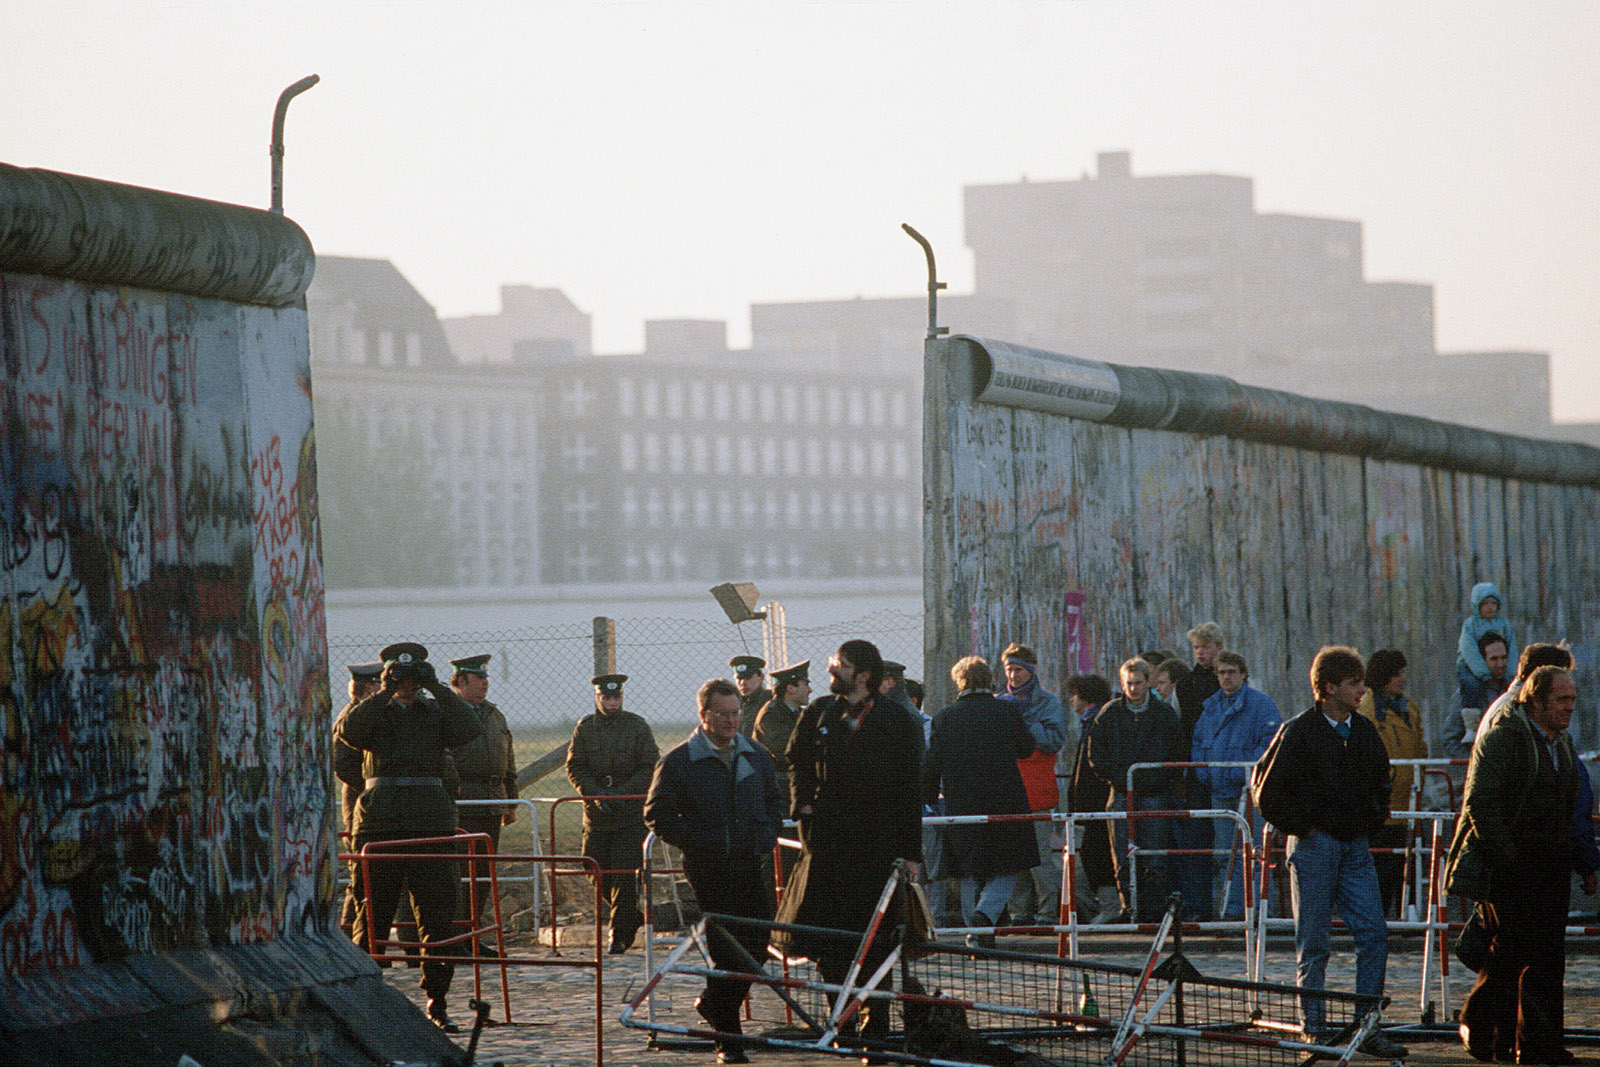 Visitors passing through the new opening in the Berlin Wall at Potsdamer Platz, November 1989